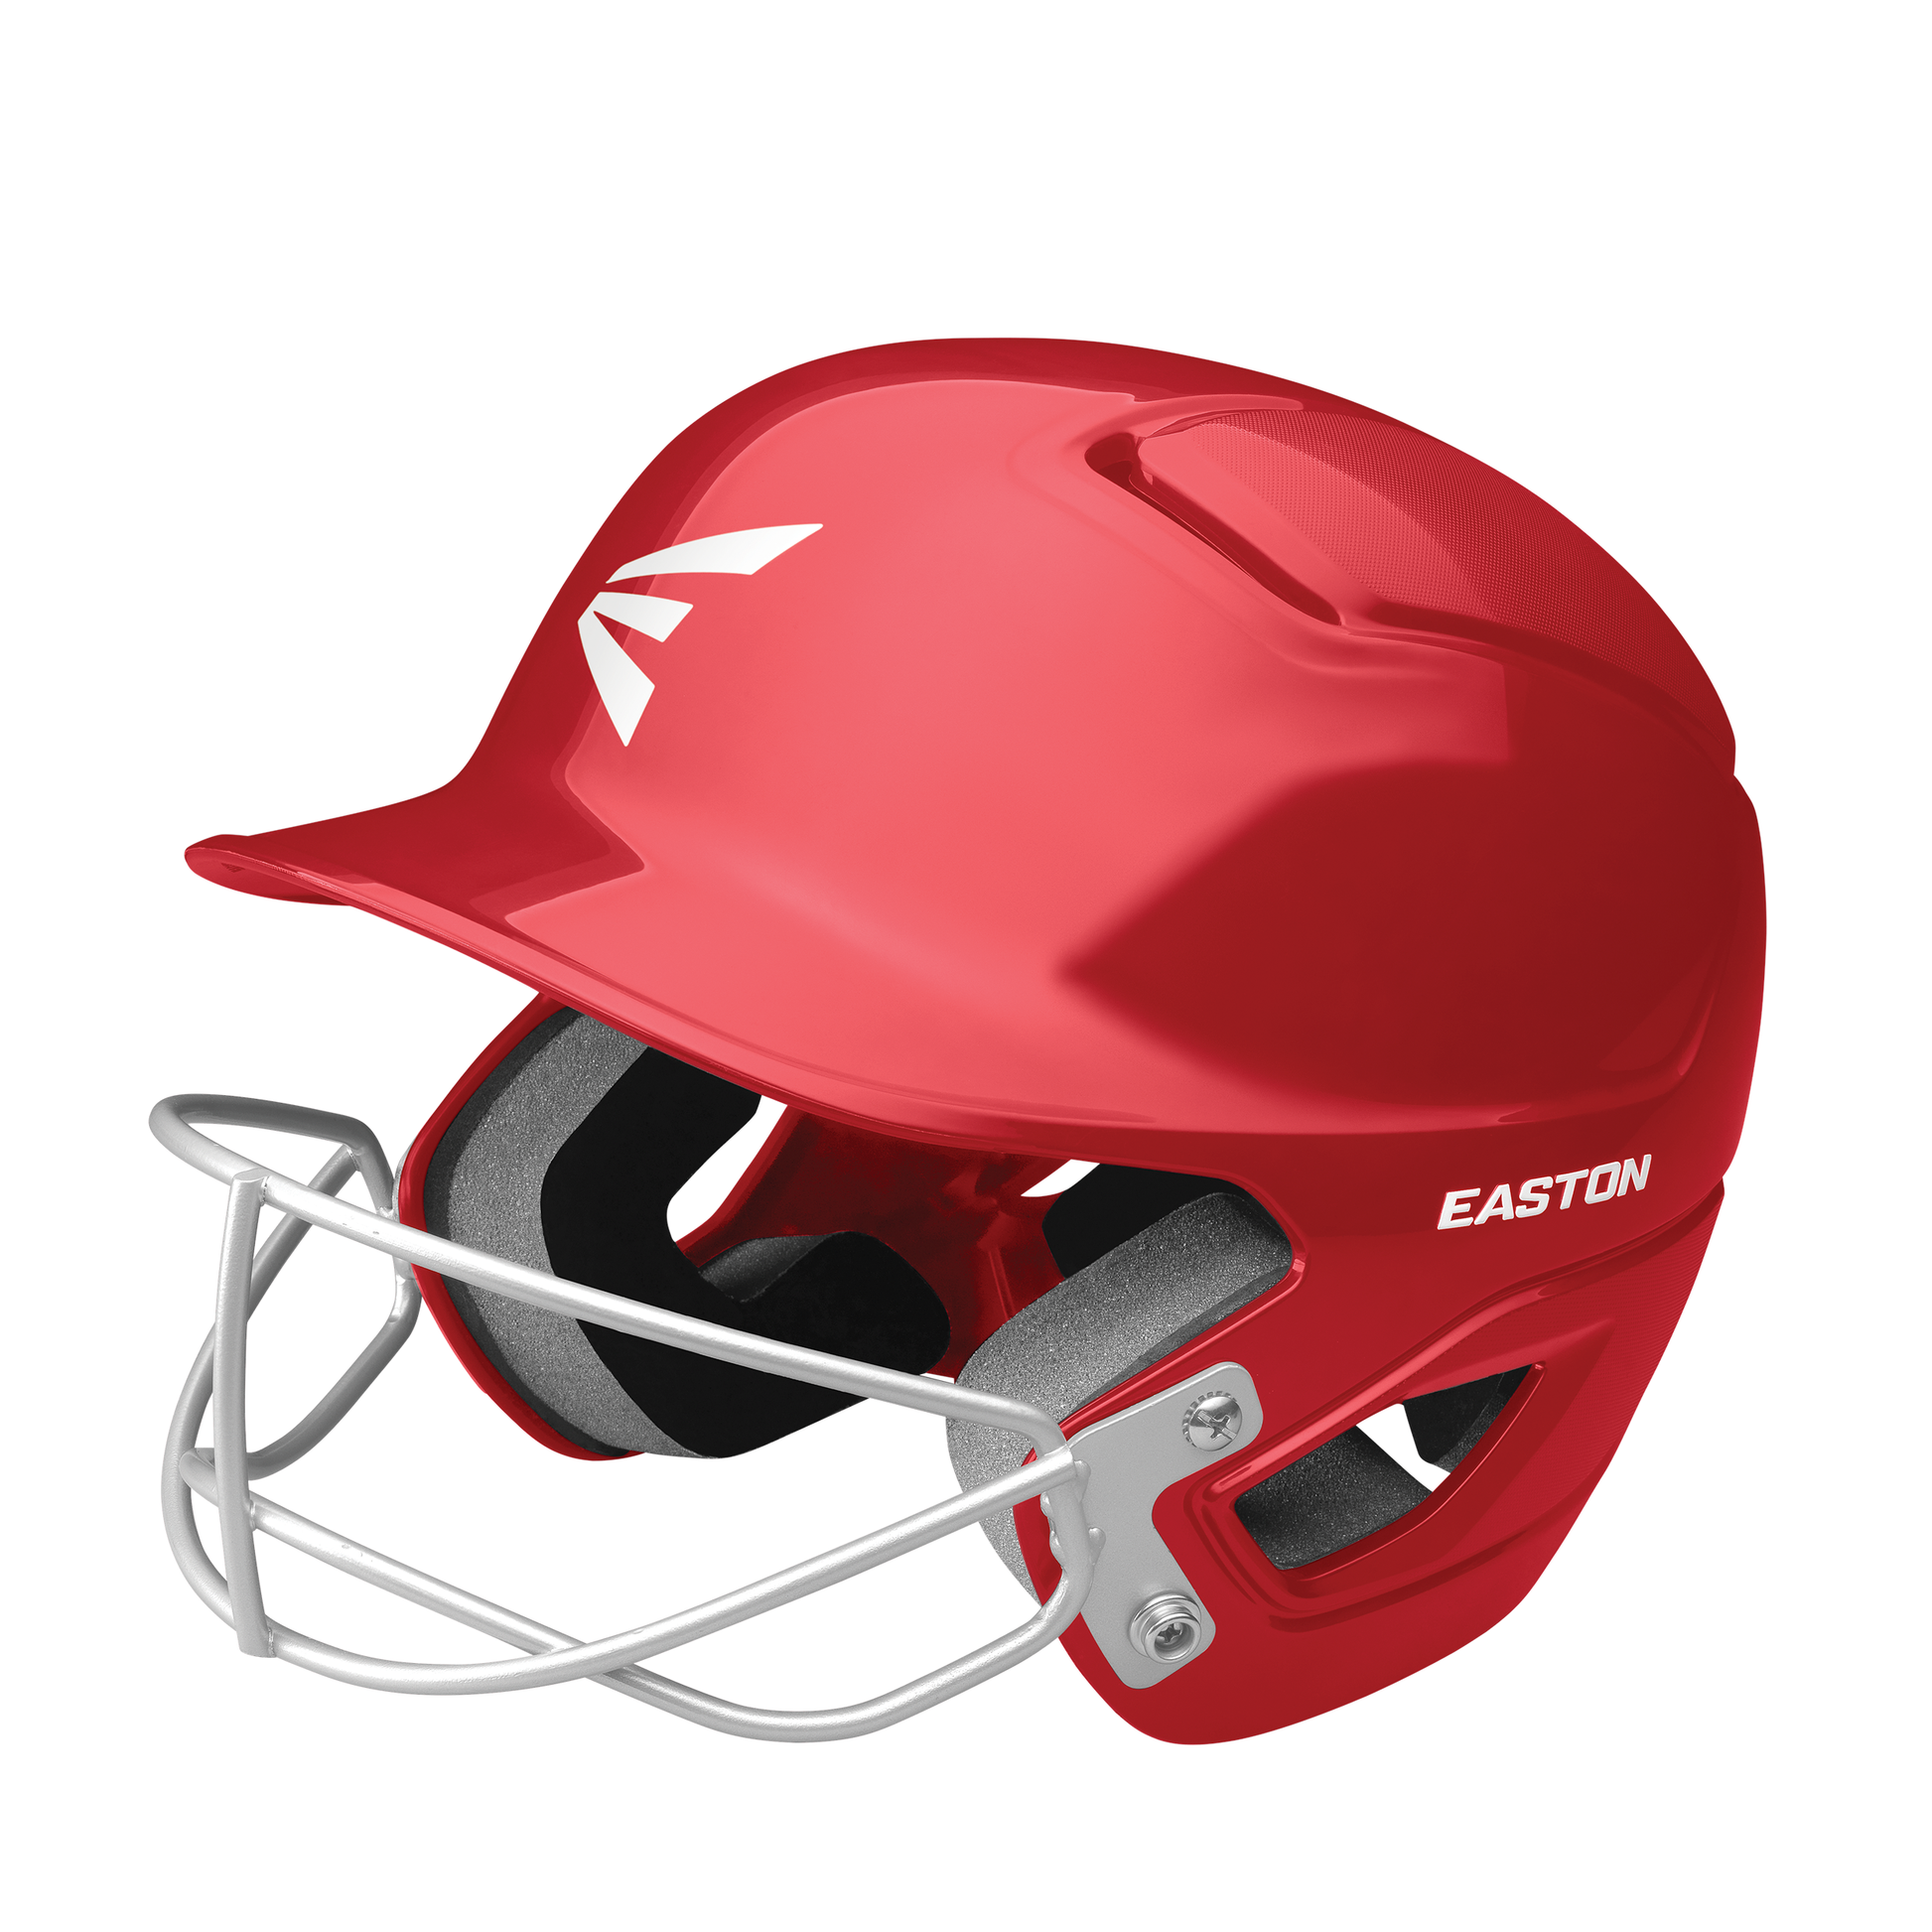 Easton Alpha Solid Fastpitch Softball Helmet with Mask